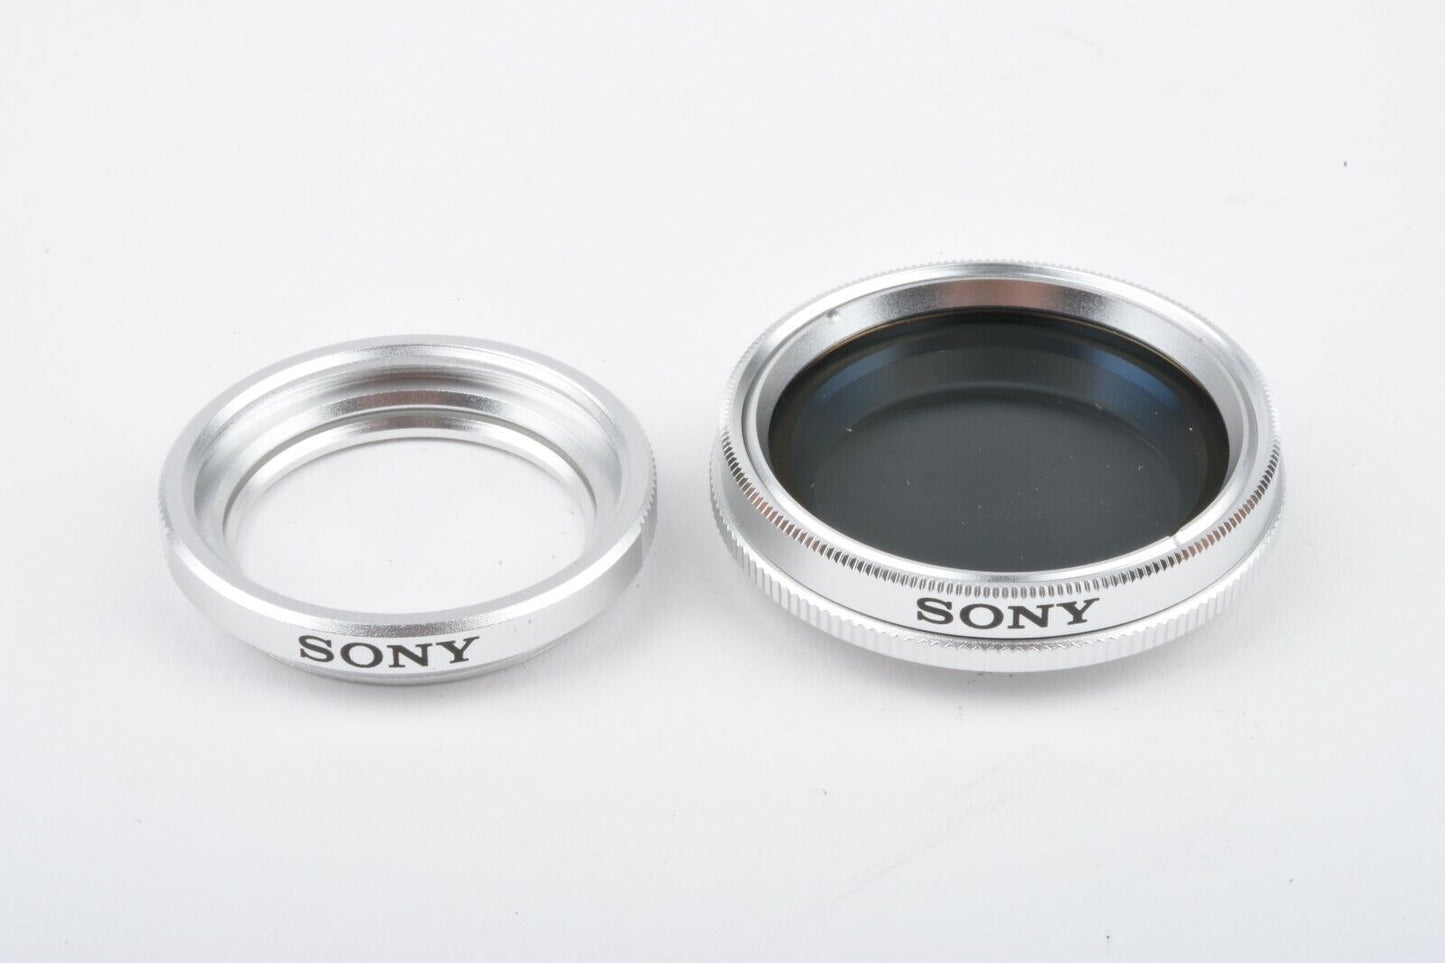 MINT- SONY 25mm CIRCULAR POLARIZING FILTER AND UV COMBO IN CASE